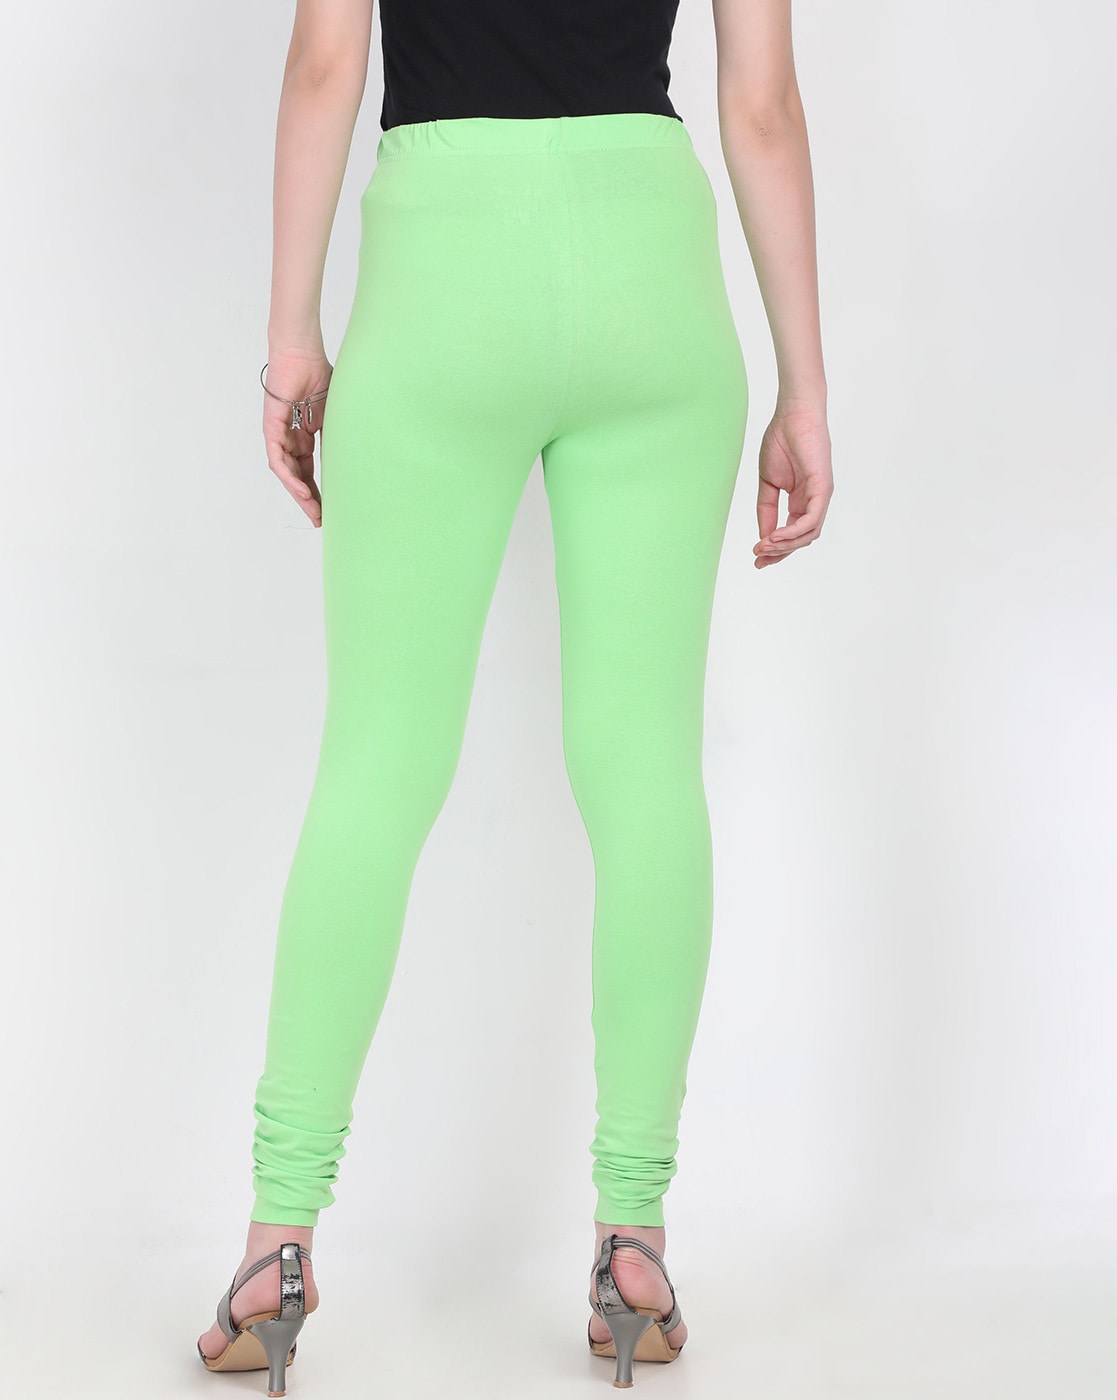 Slim fit Plain Green Leggings from Vogue and Me at Rs 125 in Mumbai